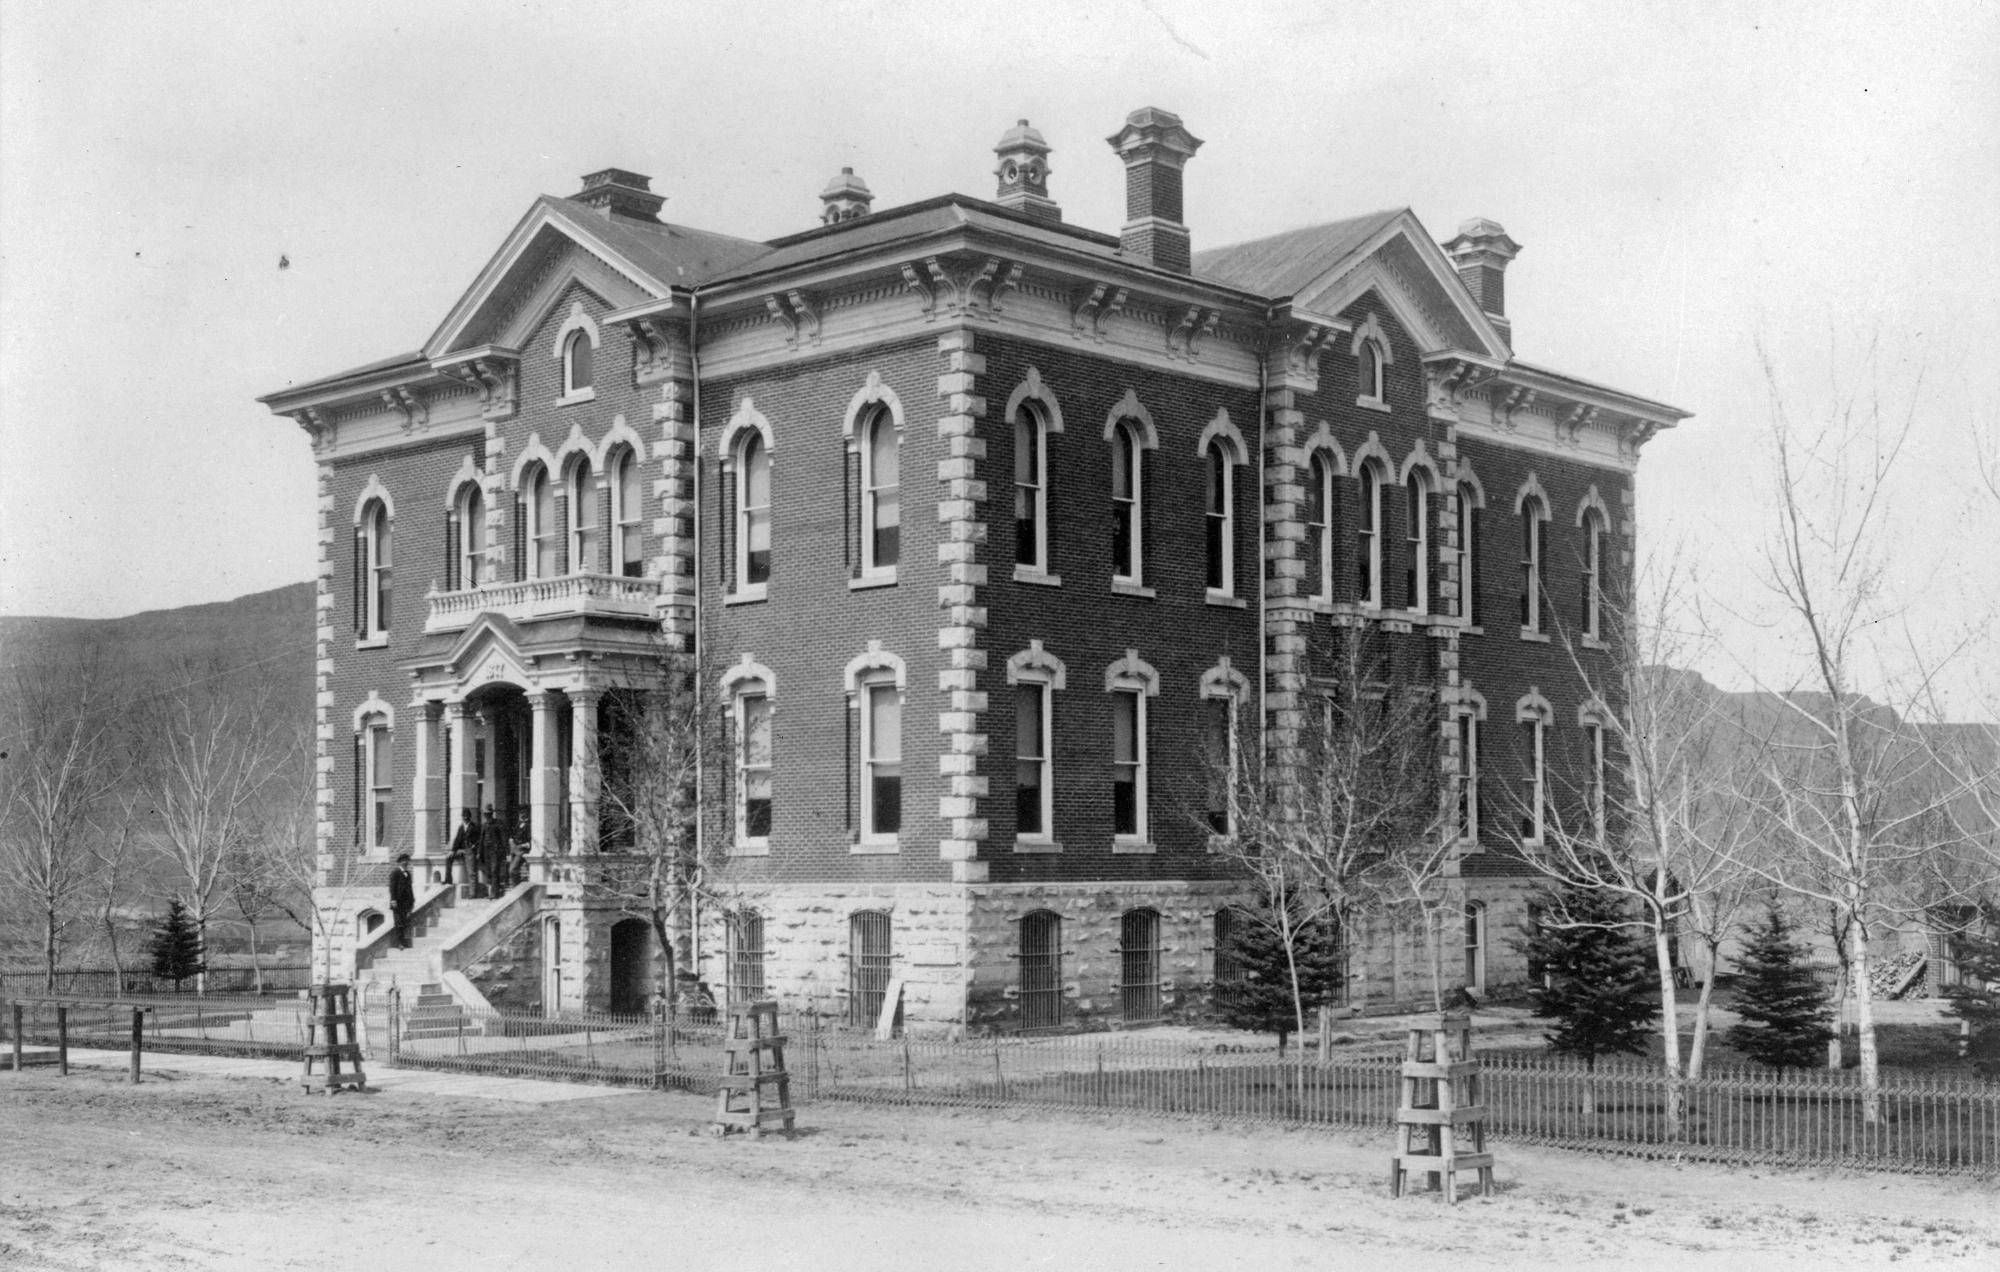 Photograph of the Jefferson County Courthouse, which opened in 1878.  It is surrounded by saplings.